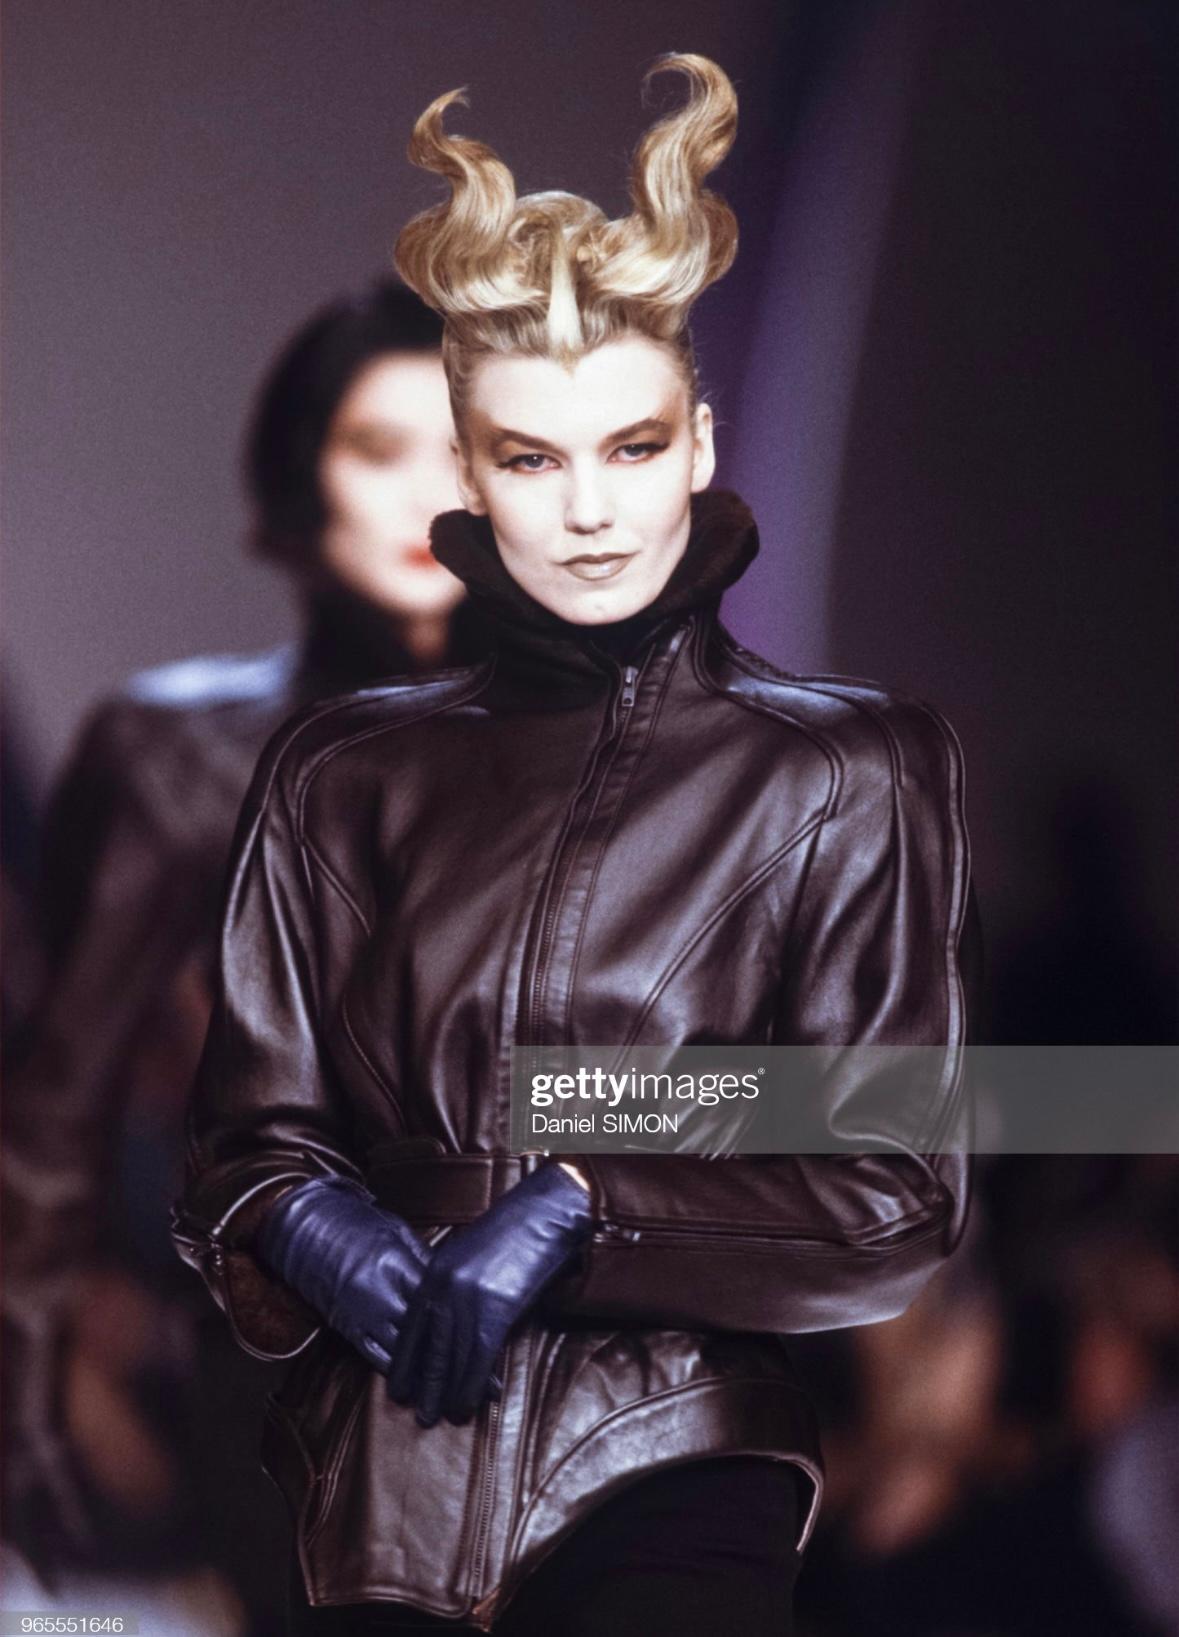 Presenting a fabulous black leather Thierry Mugler moto jacket, designed by Manfred Mugler. From the Fall/Winter 1988 